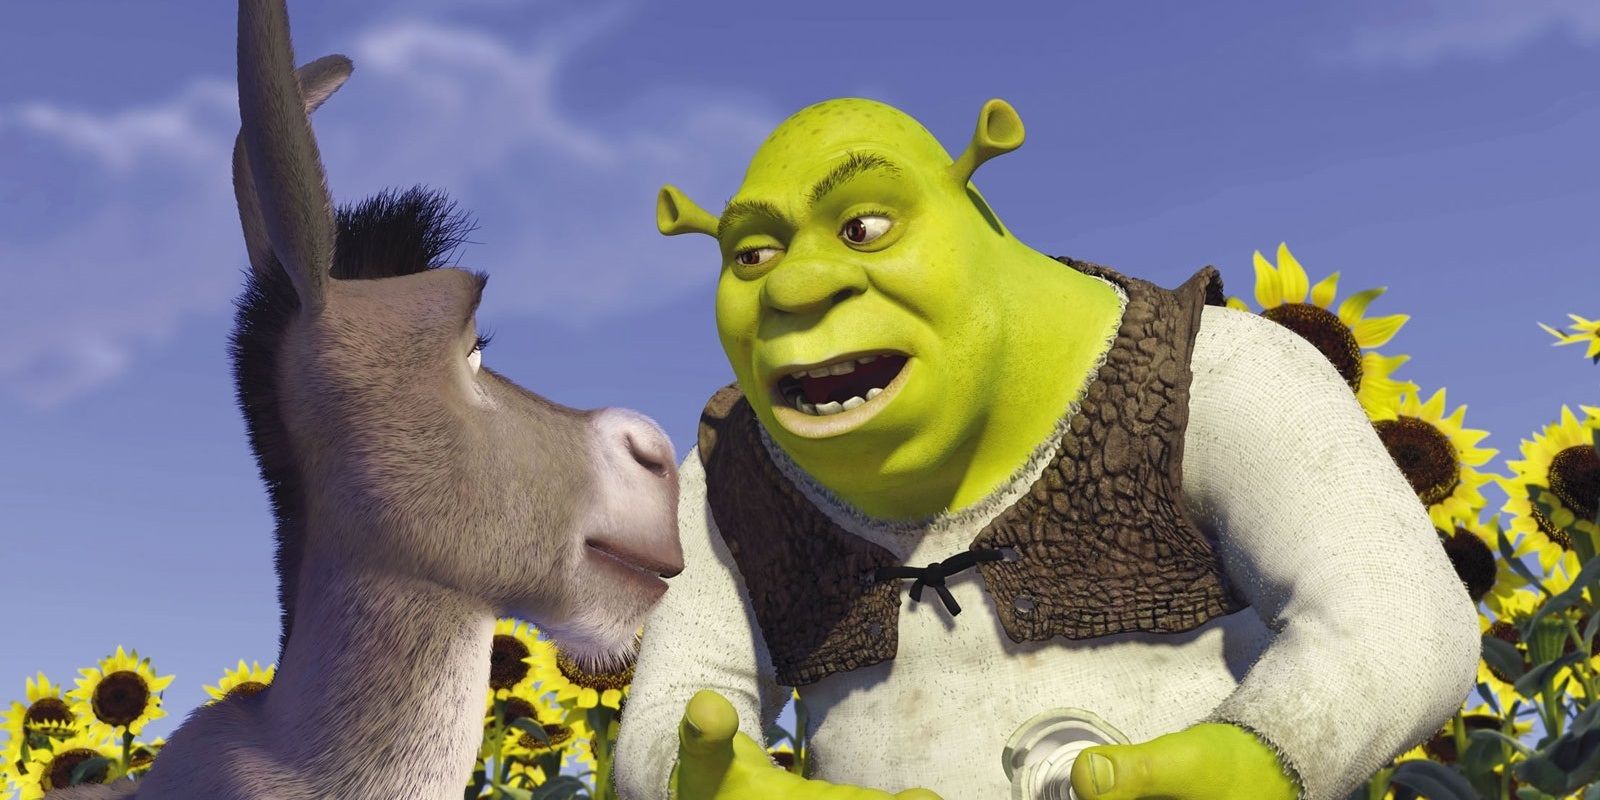 The 10 Best DreamWorks Animated Movies From The 2000s (According To Metacritic)